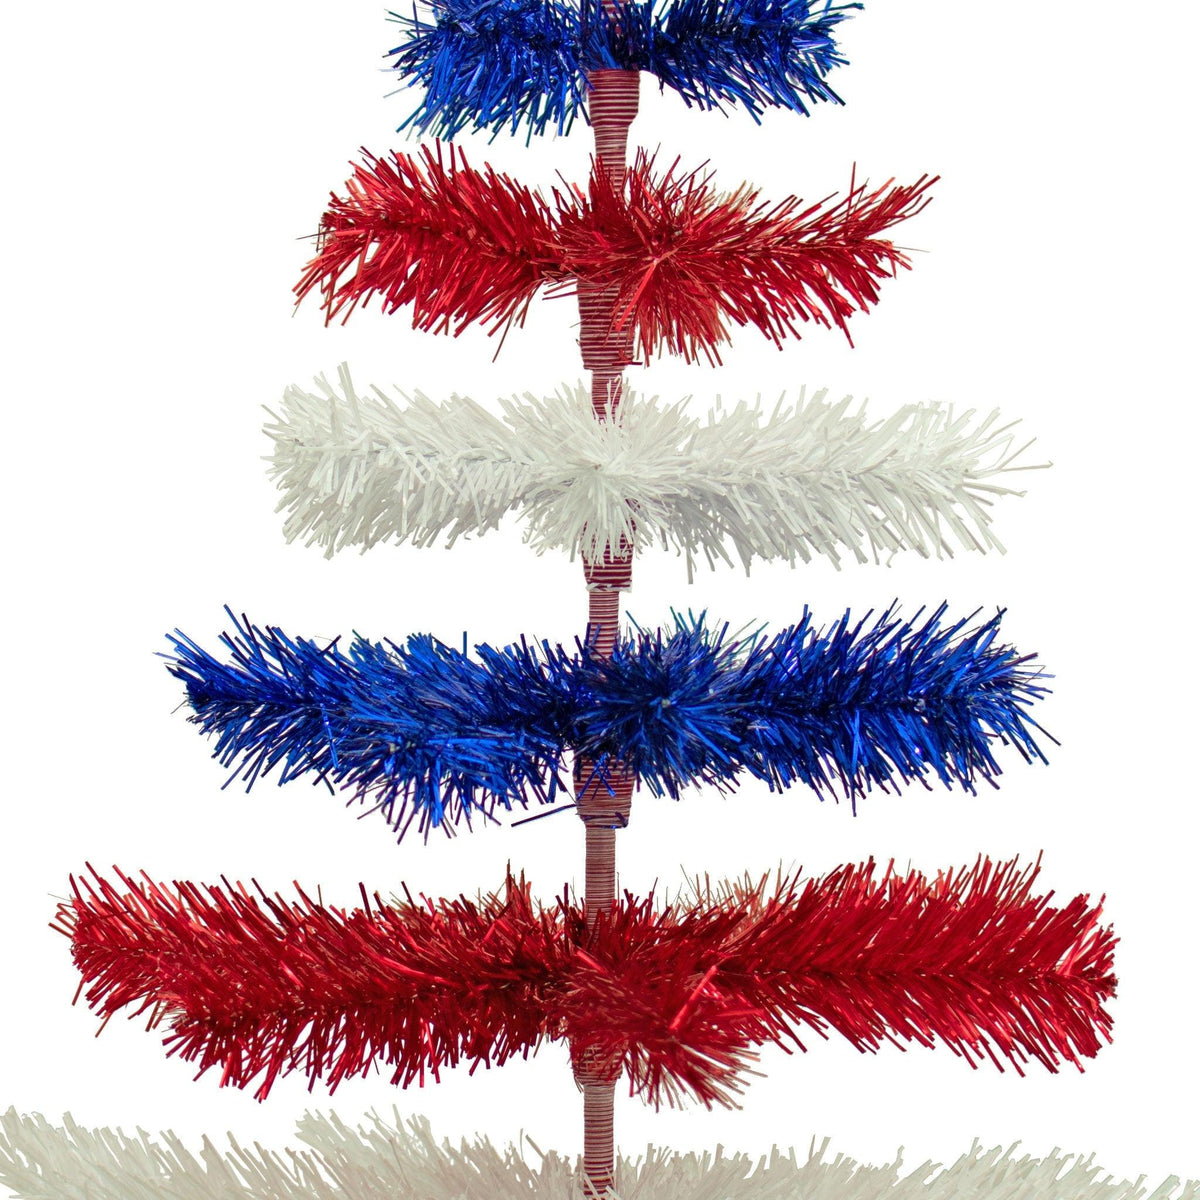 36in tall Red, White, and Blue Layered Tinsel Christmas Trees made by hand in the USA.  Decorate for the holidays with retro 4th of July-themed Trees and start creating your centerpiece now.  Shop for more at leedisplay.com